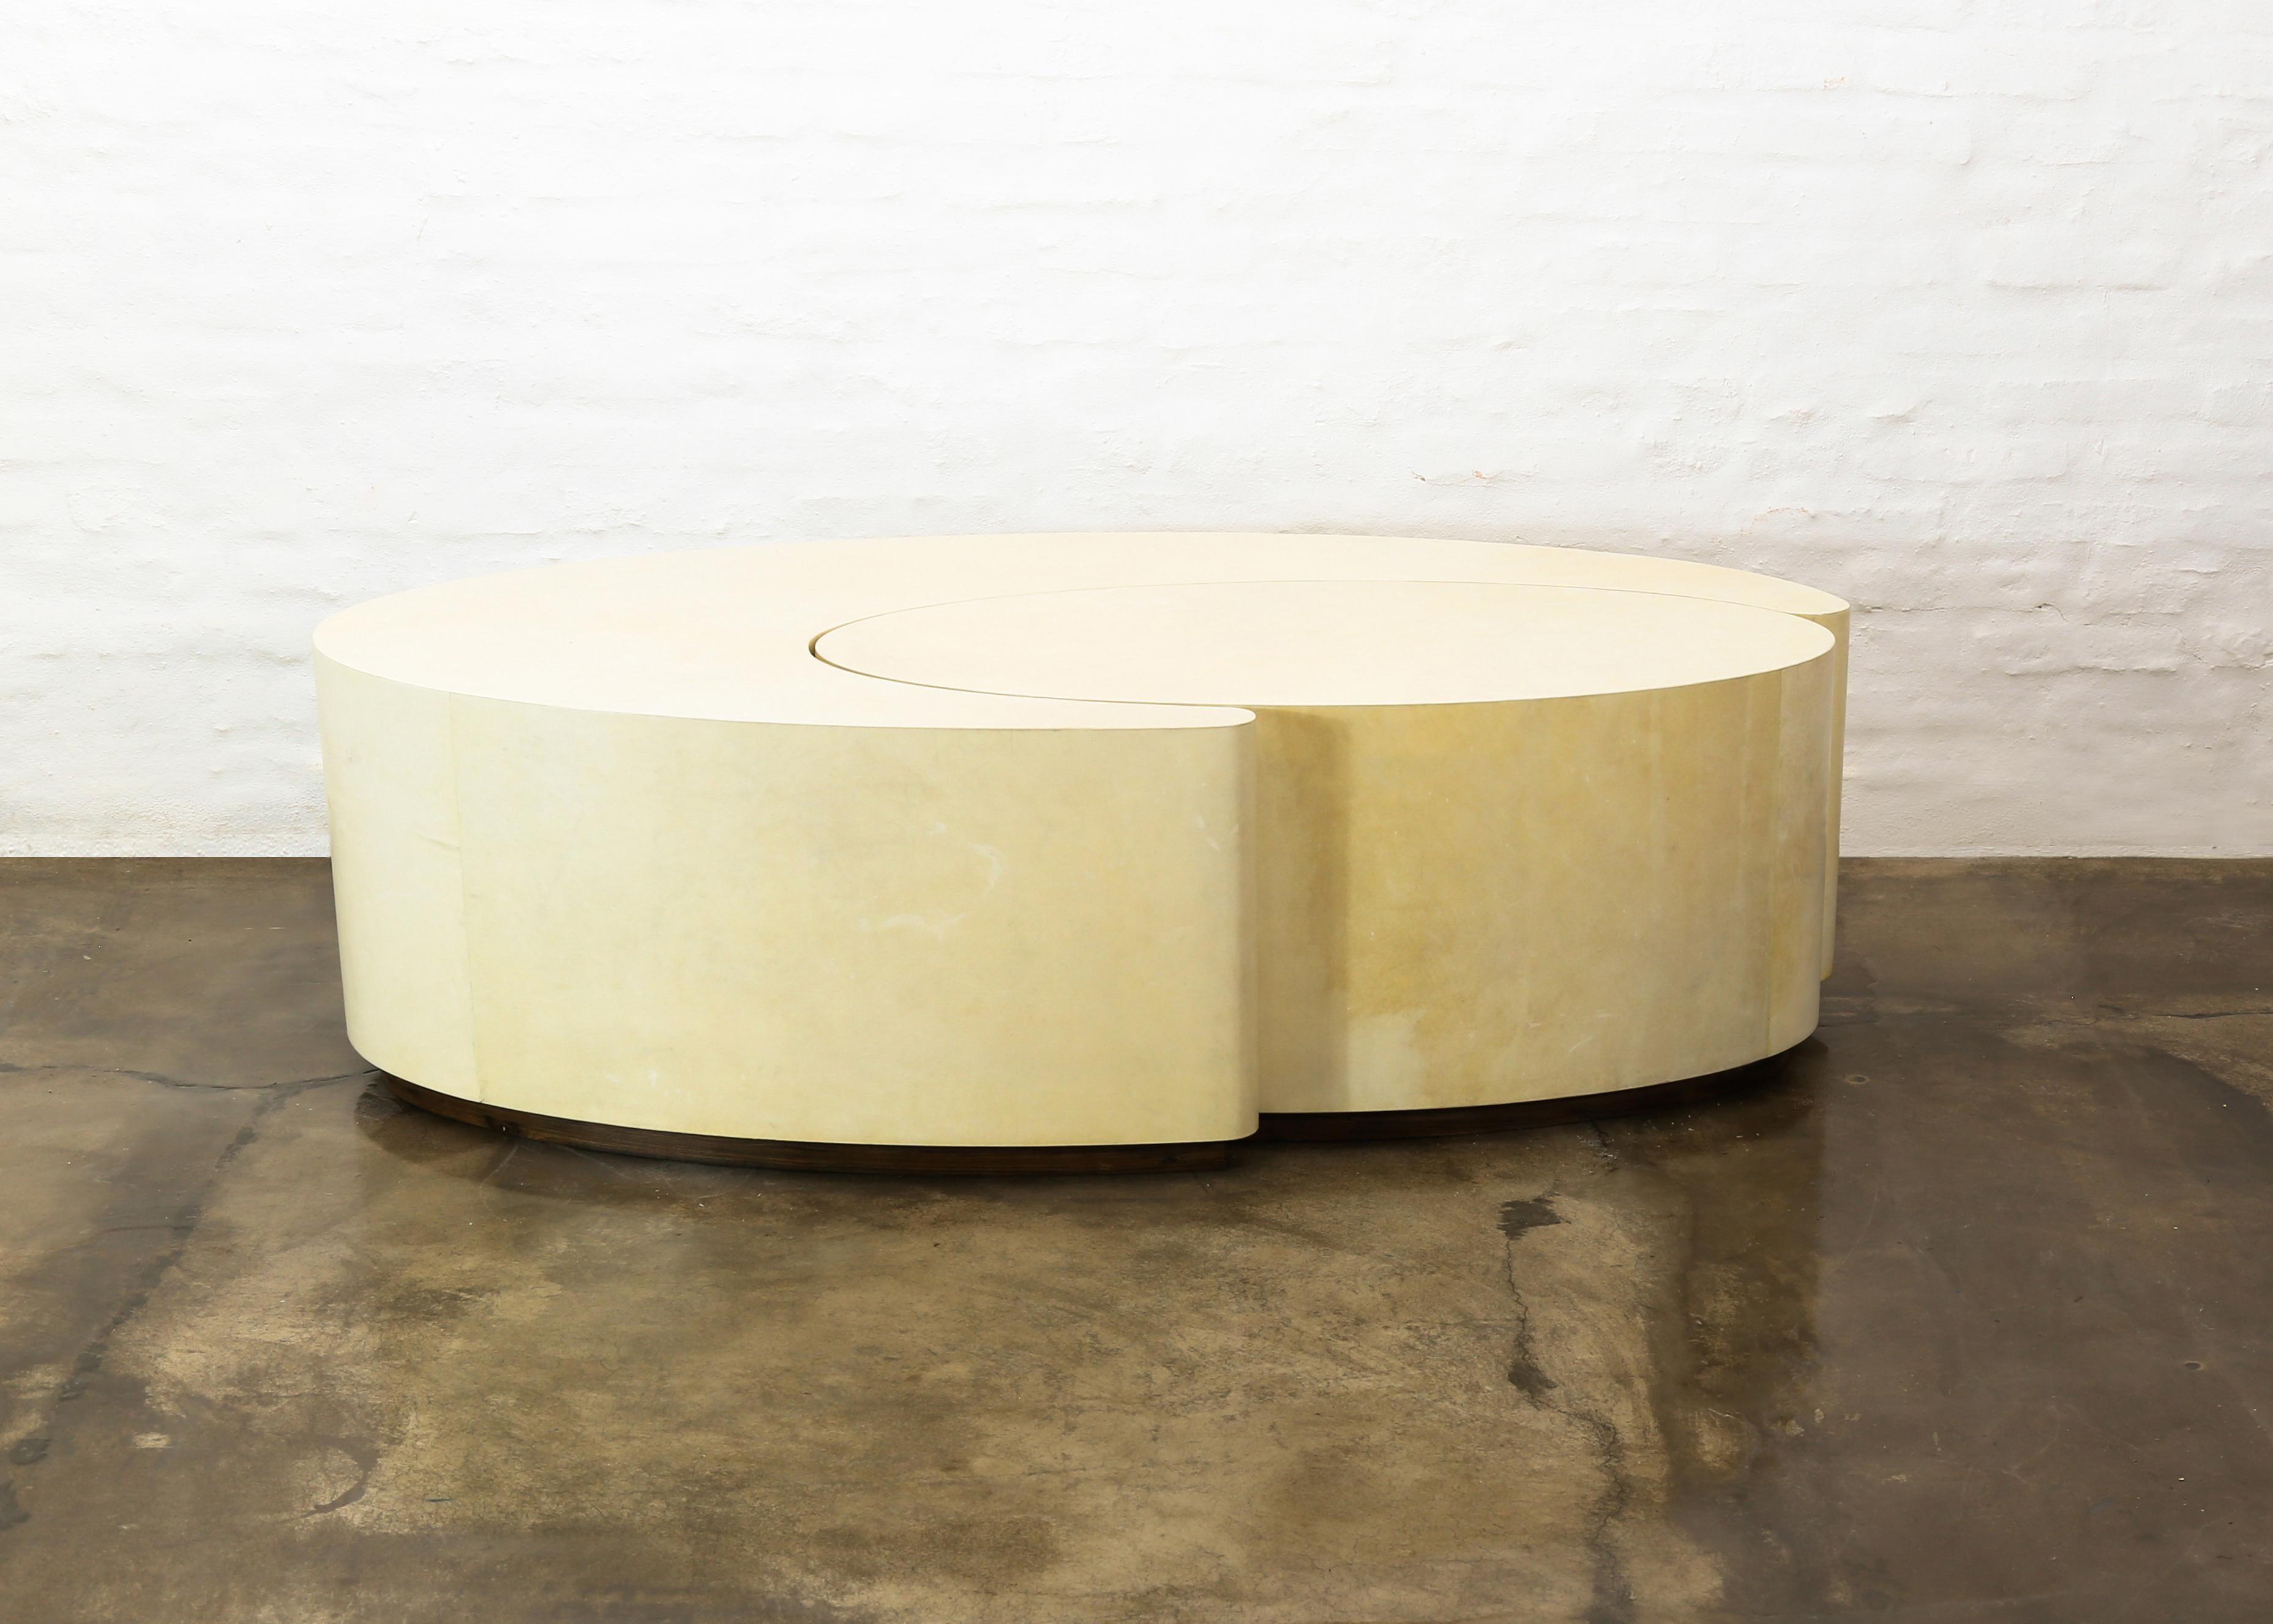 Cadenza Parchment Modern Sculptural Nesting Coffee Tables.

The Cadenza Nesting tables are handcrafted out of wood wrapped with geniune Argentine Goatskin, shown here in a natural finish, and can be pushed together to form one large oval, or moved